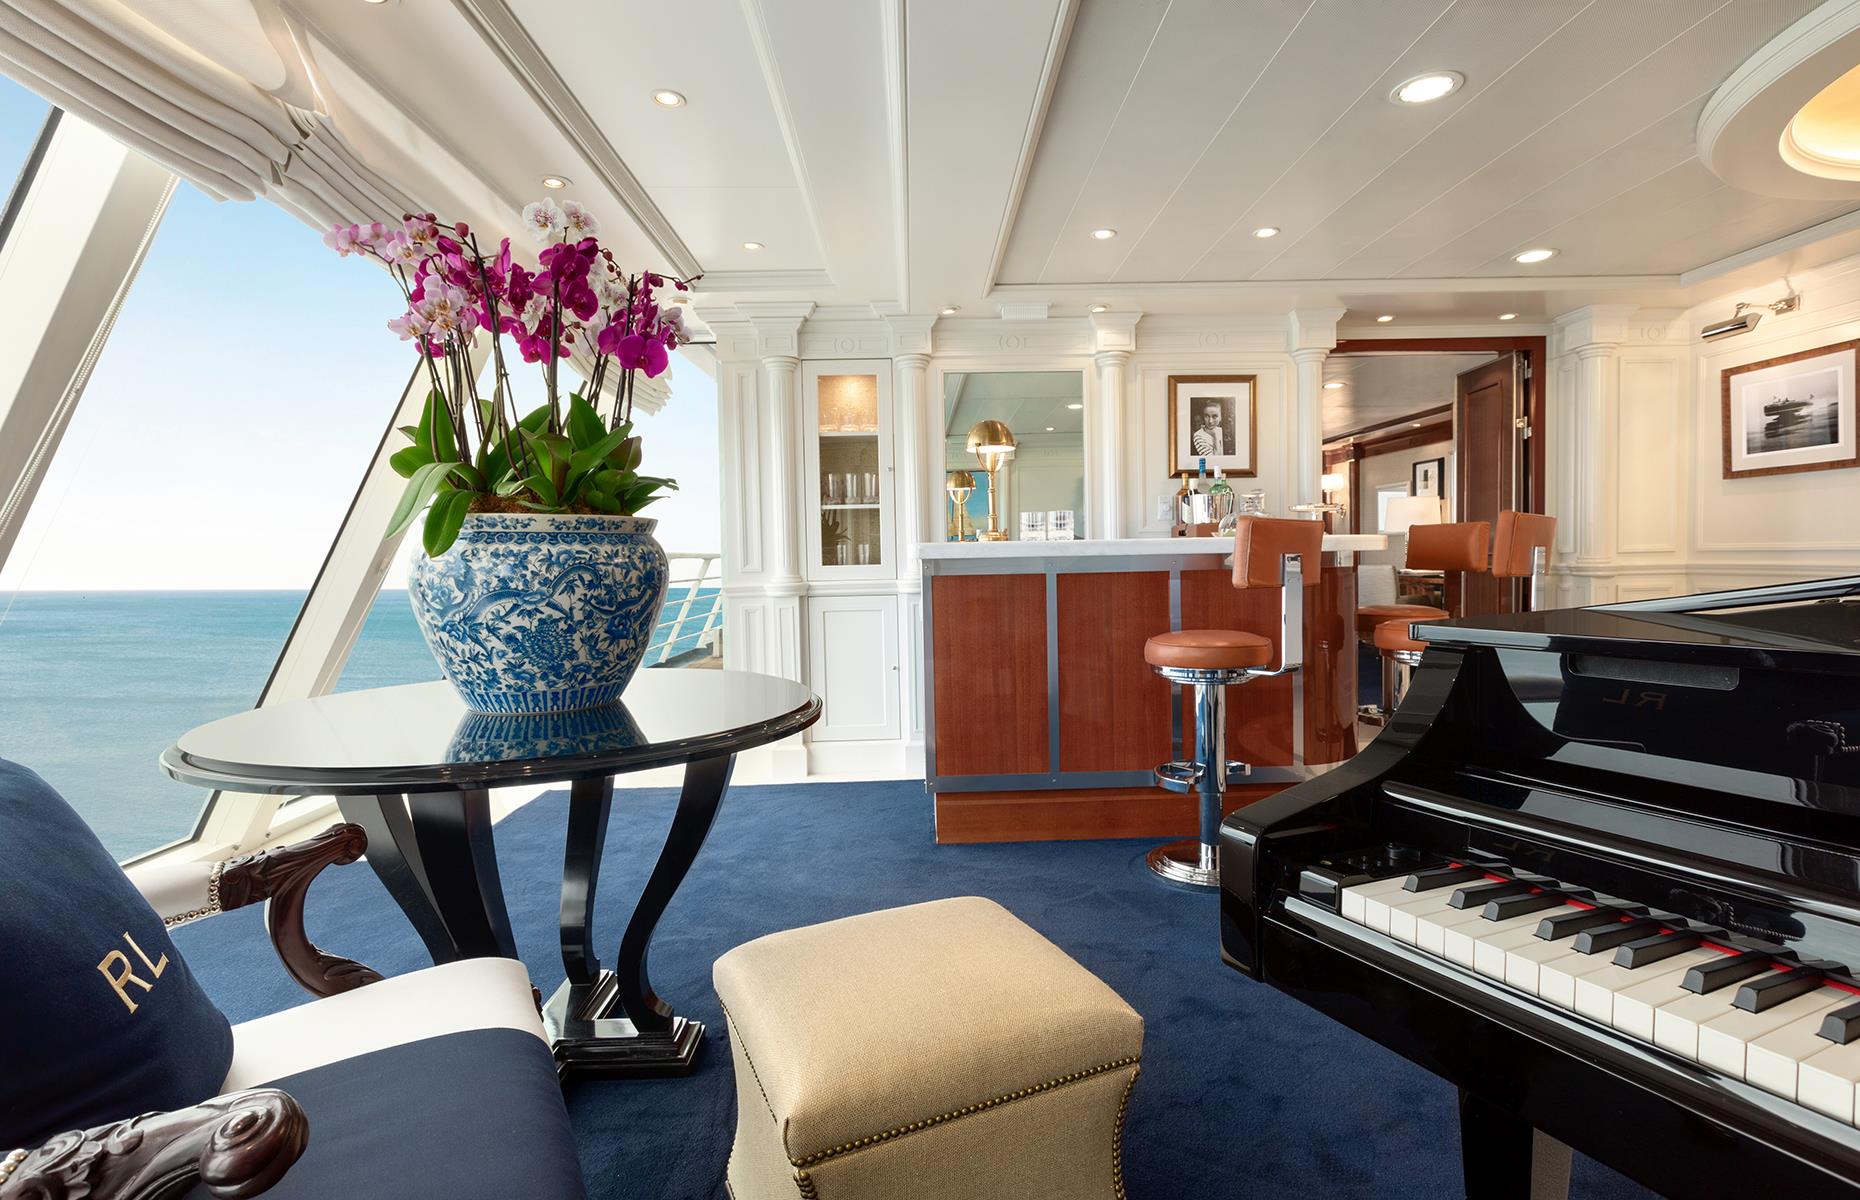 <p>No expense has been spared when it comes to suite decor on luxury ships. For ultimate opulence, opt for the Owner’s suites which you’ll find on <a href="https://www.oceaniacruises.com/?s=PS_NEO_BD_BRA_GOO_NA_SRH_BRANDCORE_oceania%20cruises_NA_UK_NA_700000002135099-71700000078259454-58700006604026348-oceania+cruises&customer_id=305-710-7891&gclid=CjwKCAiAzp6eBhByEiwA_gGq5Na3sR4Z9wE6_4XQu9N959pFRXBuOsBSfeEbnGTiK0-FvBbIbhgCvRoCaTsQAvD_BwE&gclsrc=aw.ds">Oceania Cruises</a>' ships. These cover 1,991 square feet (185sqm), have two walk-in closets and entrance foyers with a grand piano and a mahogany bar. A 15-day Svalbard & Arctic Passage cruise with accommodation in the Grand Owner’s suite costs from £18,669 ($23,044) per person.</p>